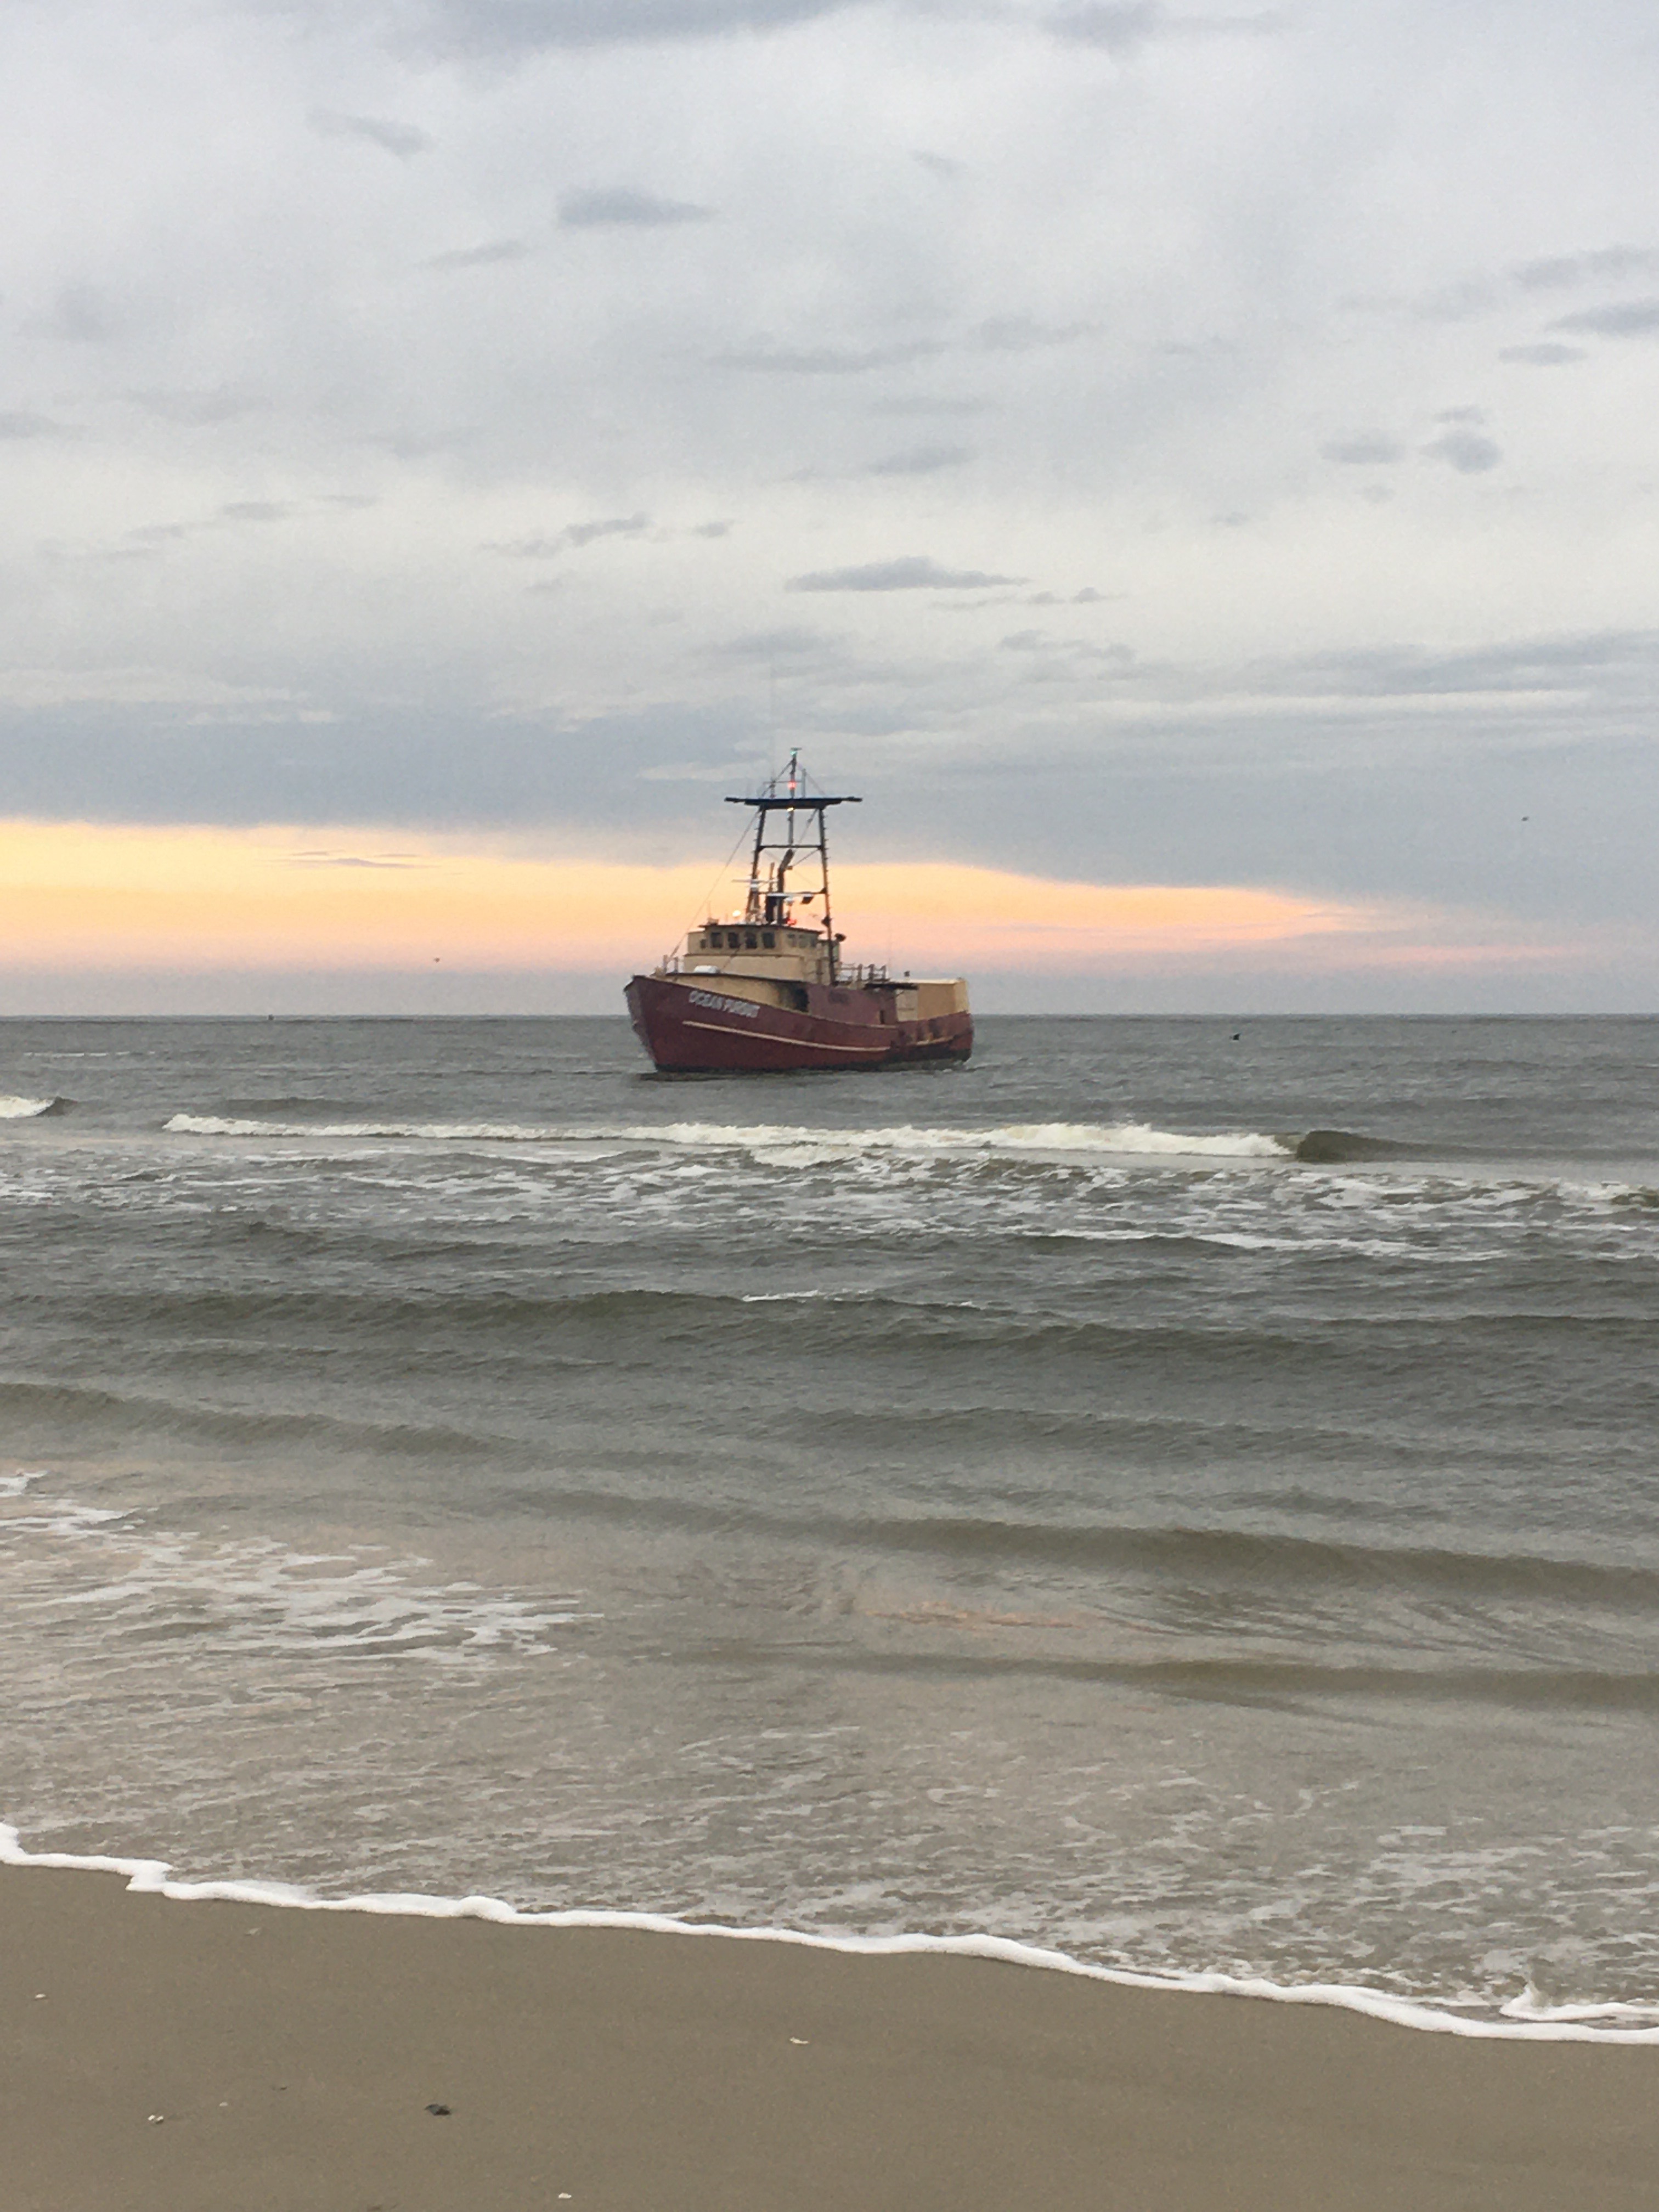 Ocean Pursuit grounded vessel the morning of March 3, 2020.